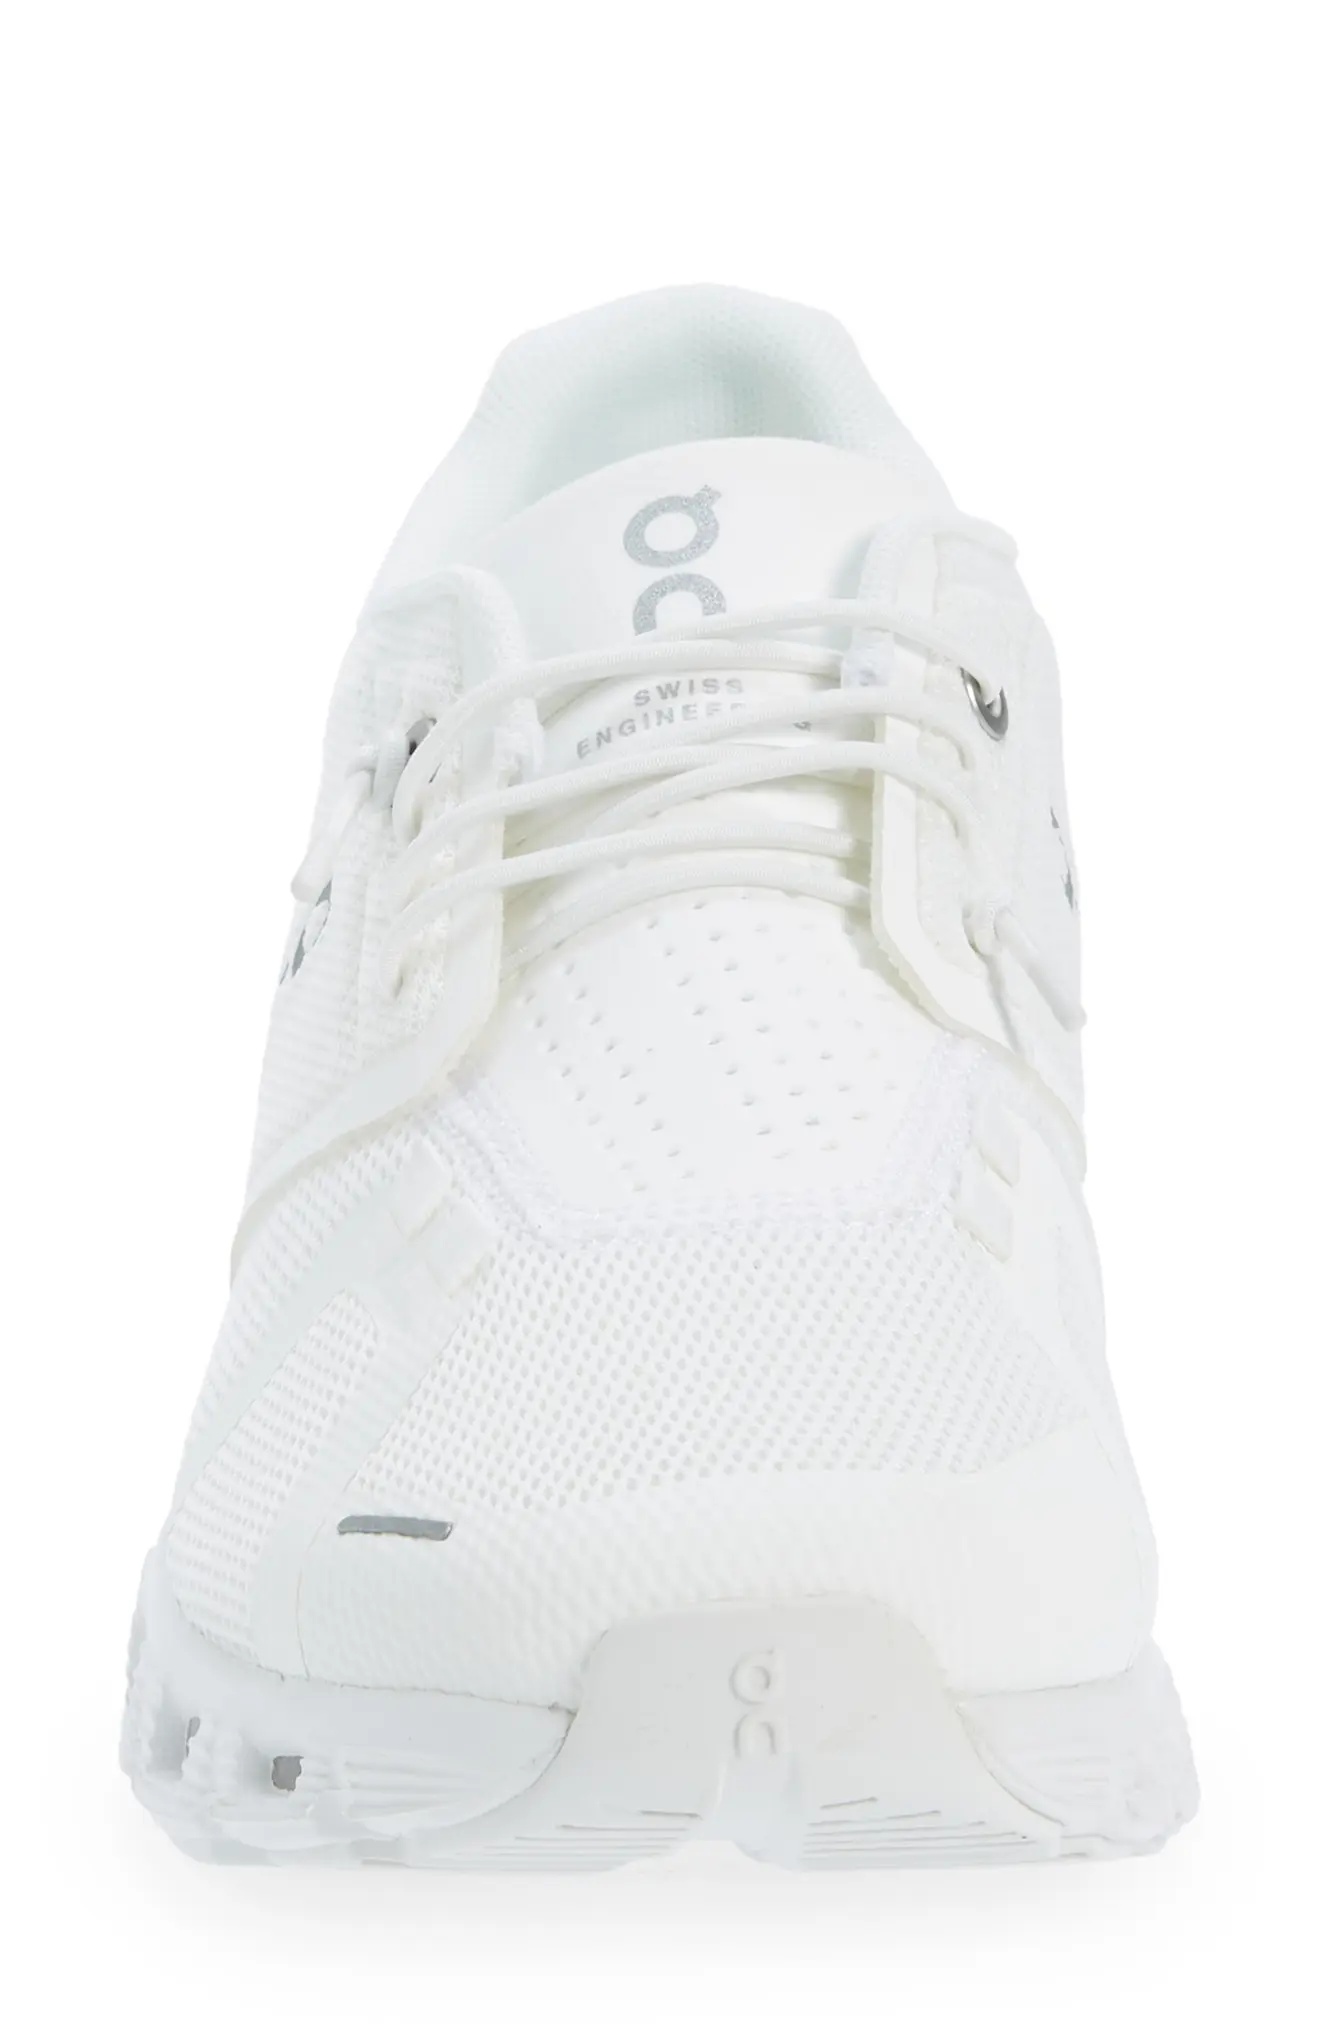 Cloud 5 Running Shoe in Undyed White/White - 4